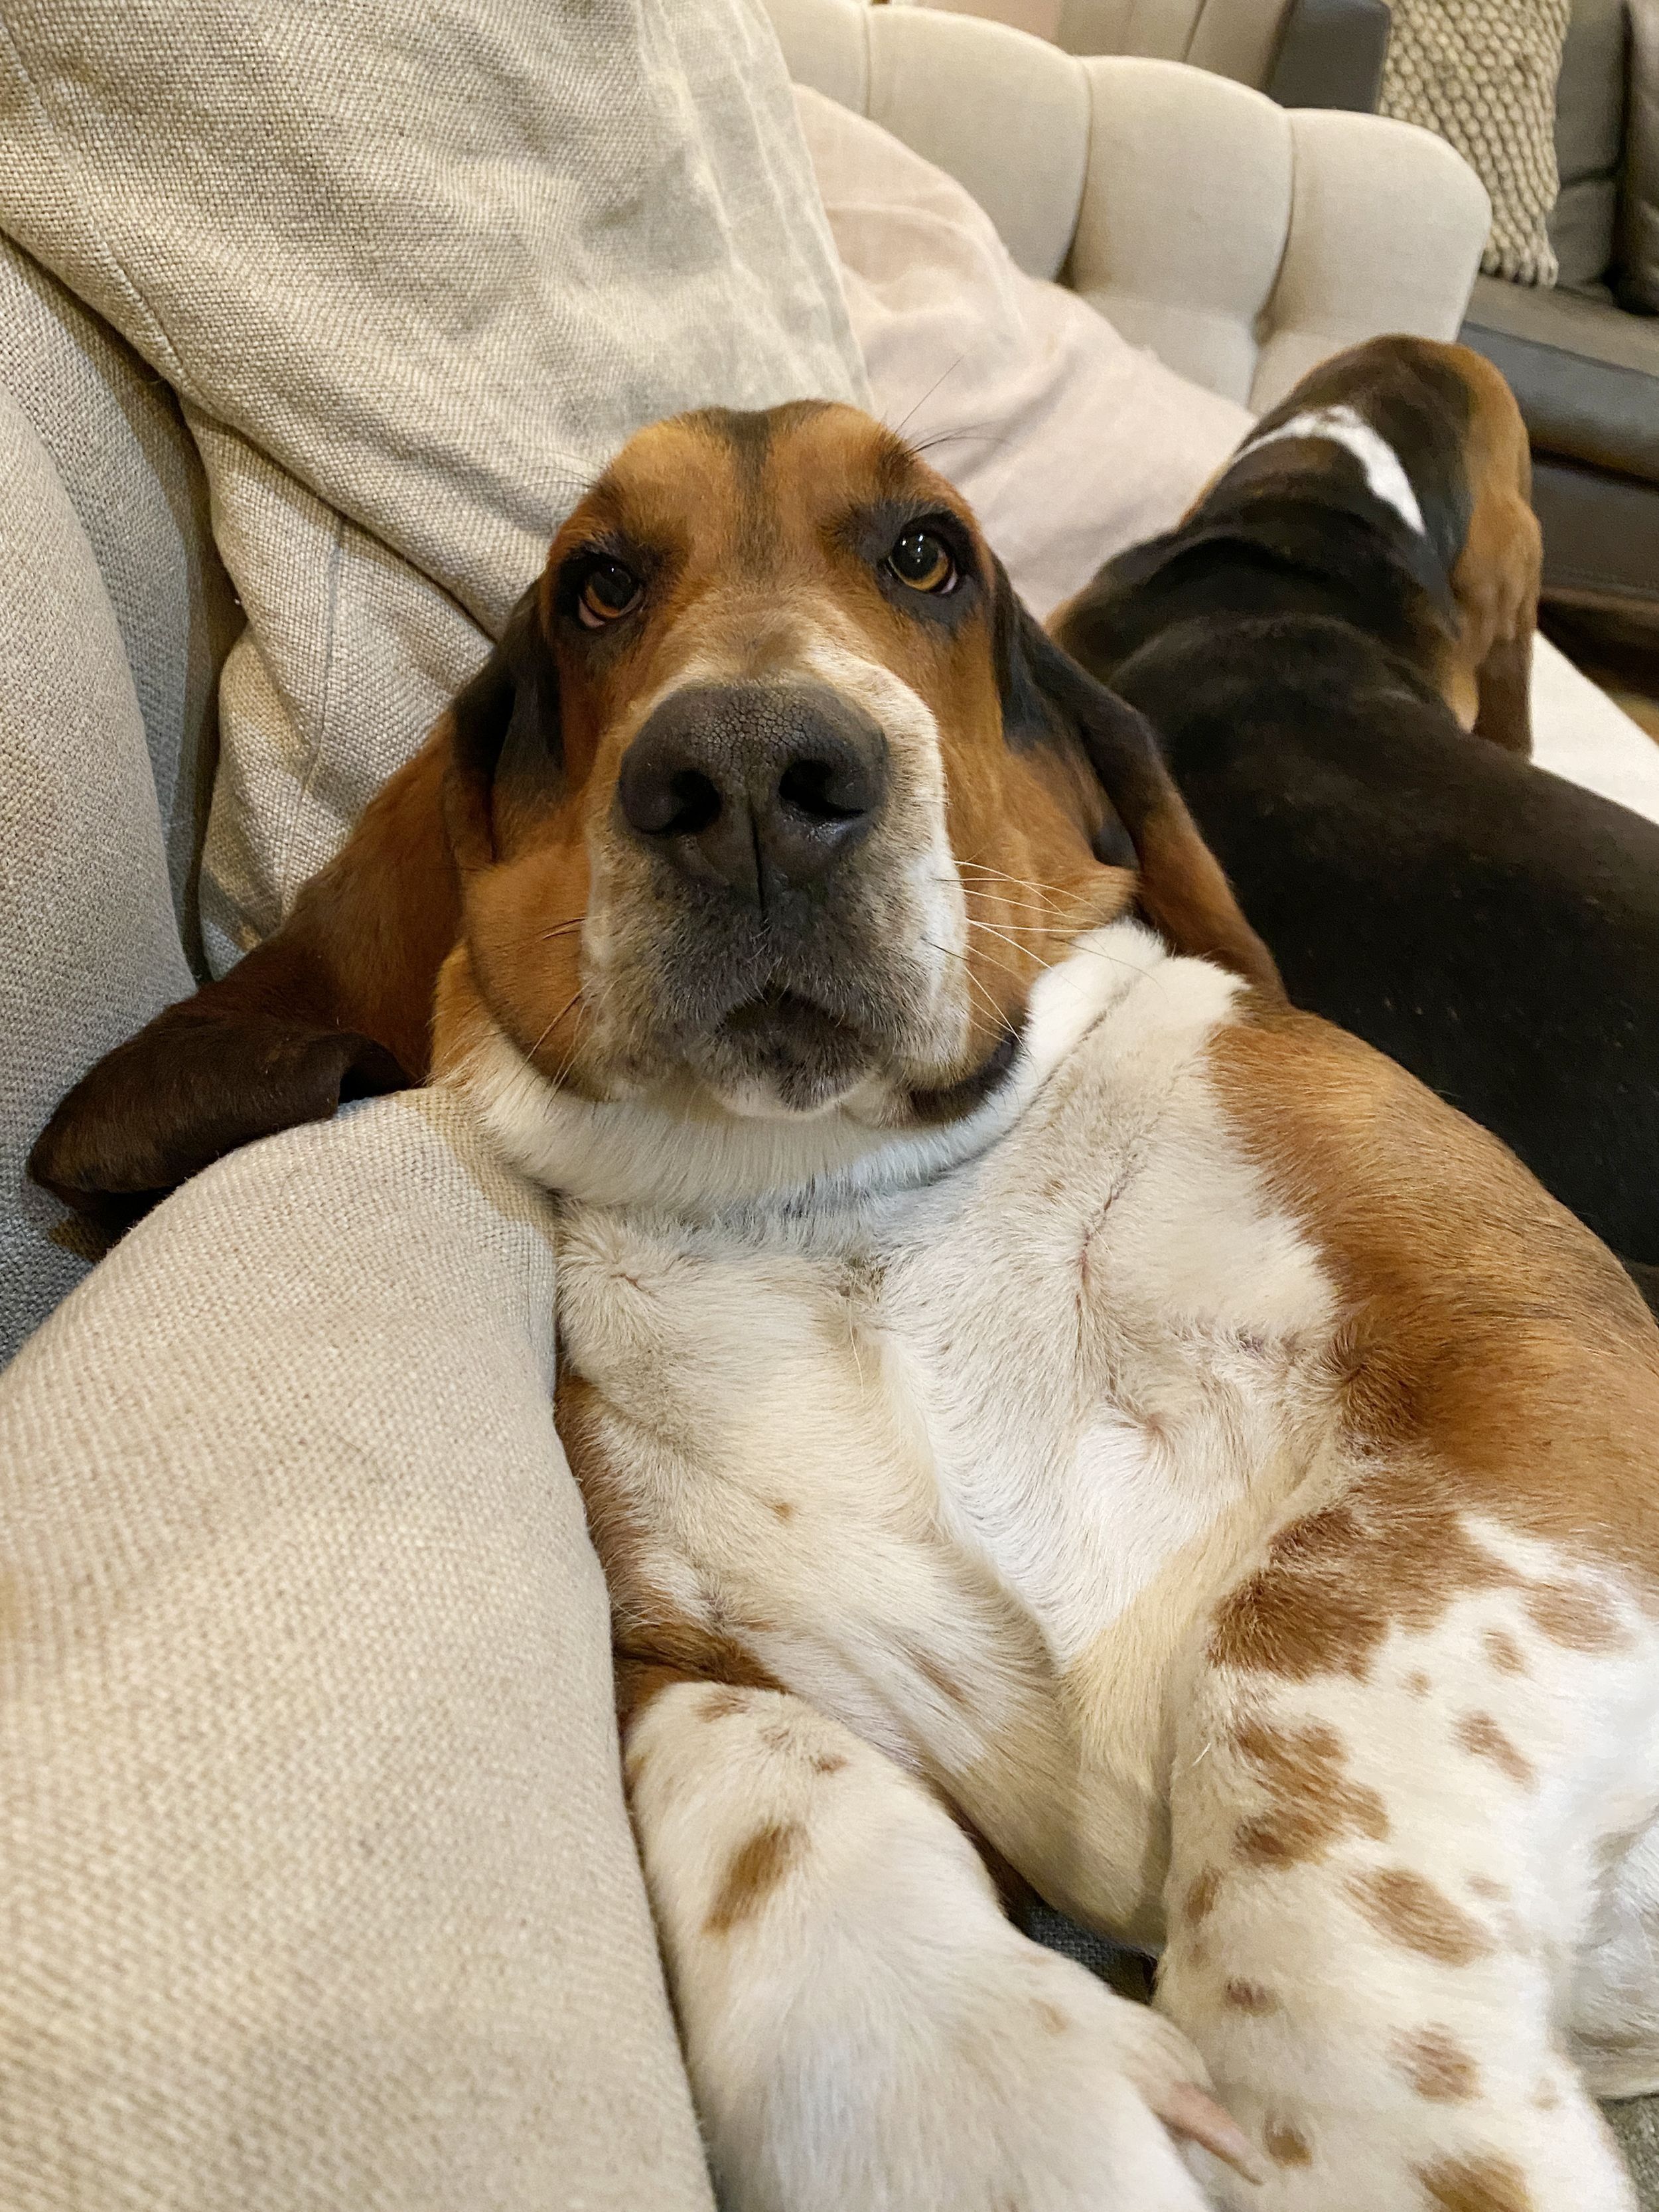 10 Basset Hound Facts - Why Are Basset Hounds So Special?